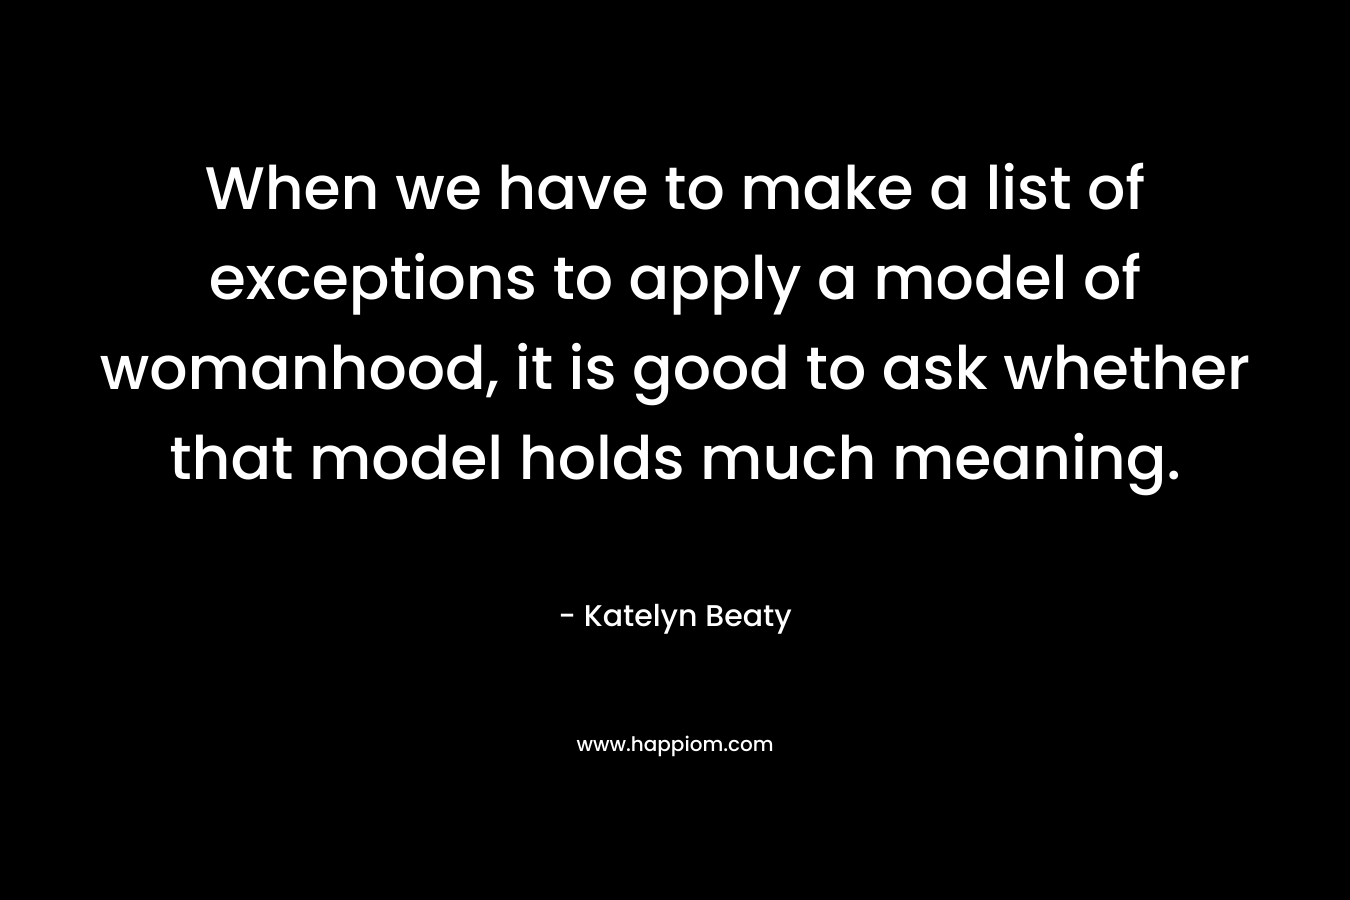 When we have to make a list of exceptions to apply a model of womanhood, it is good to ask whether that model holds much meaning.